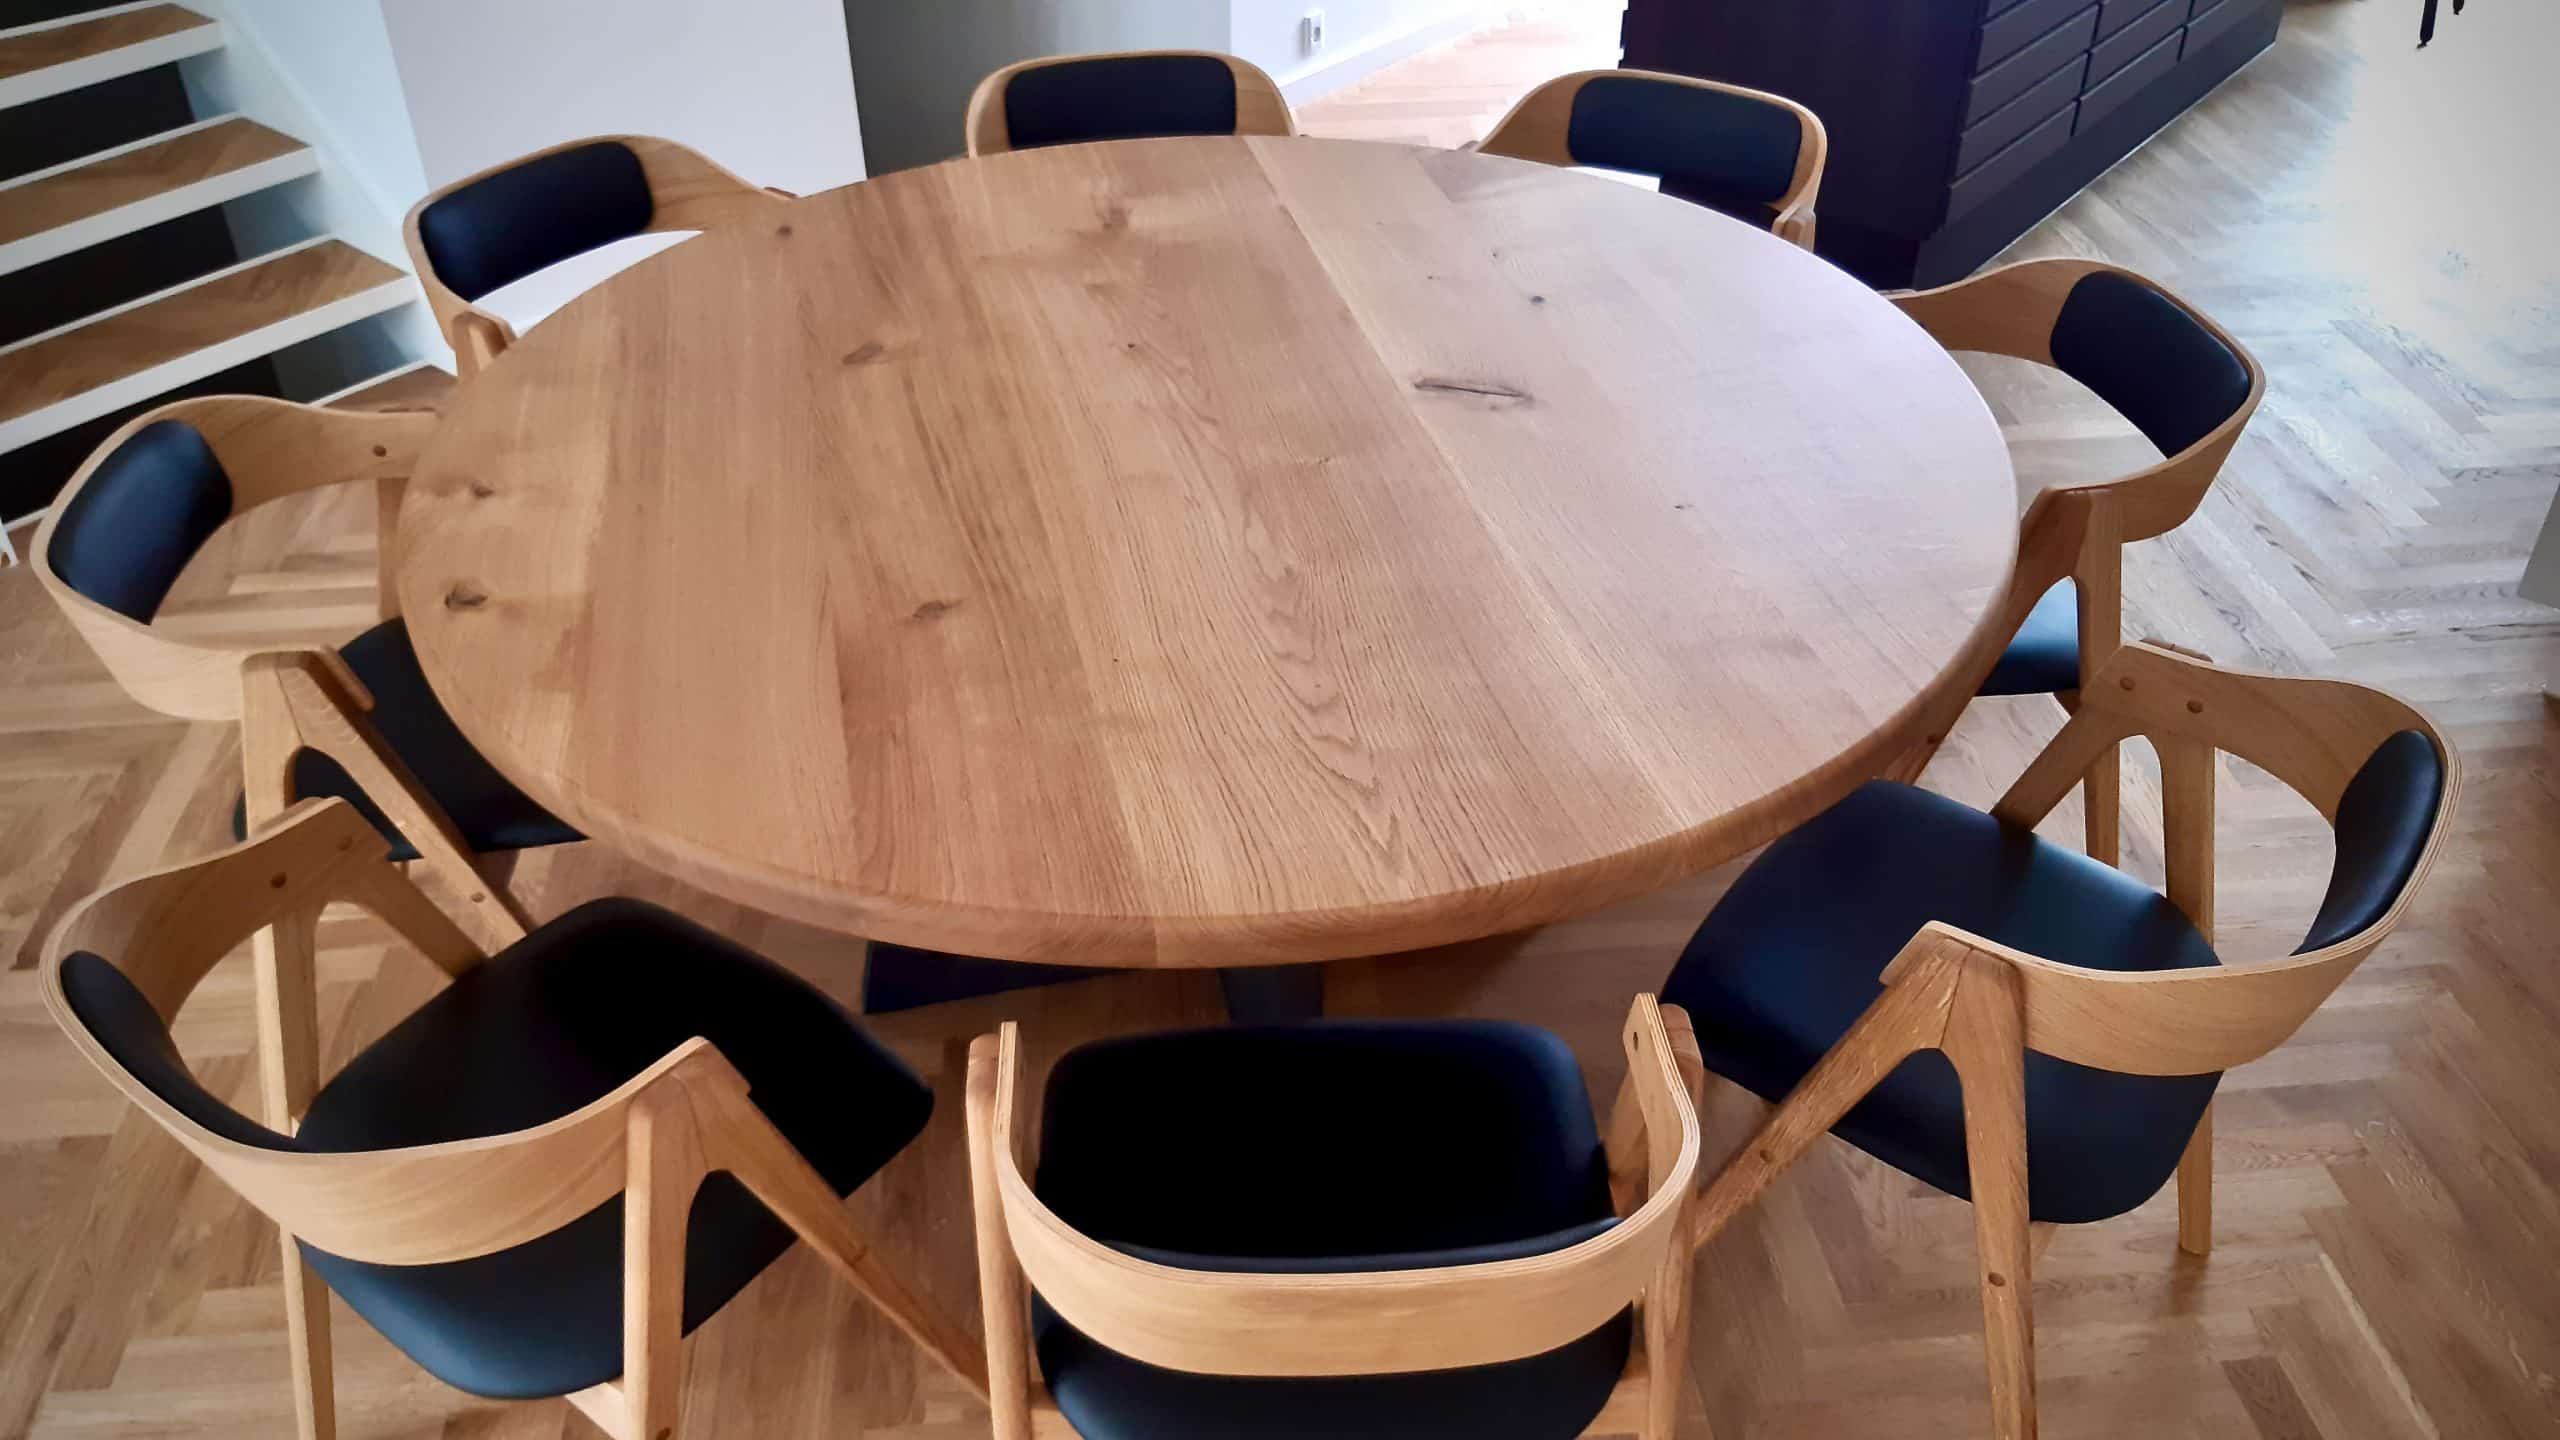 round table round table oval table table in wooden wooden table traemobler kaerbygaard kaerbygård August 2020 13 scaled